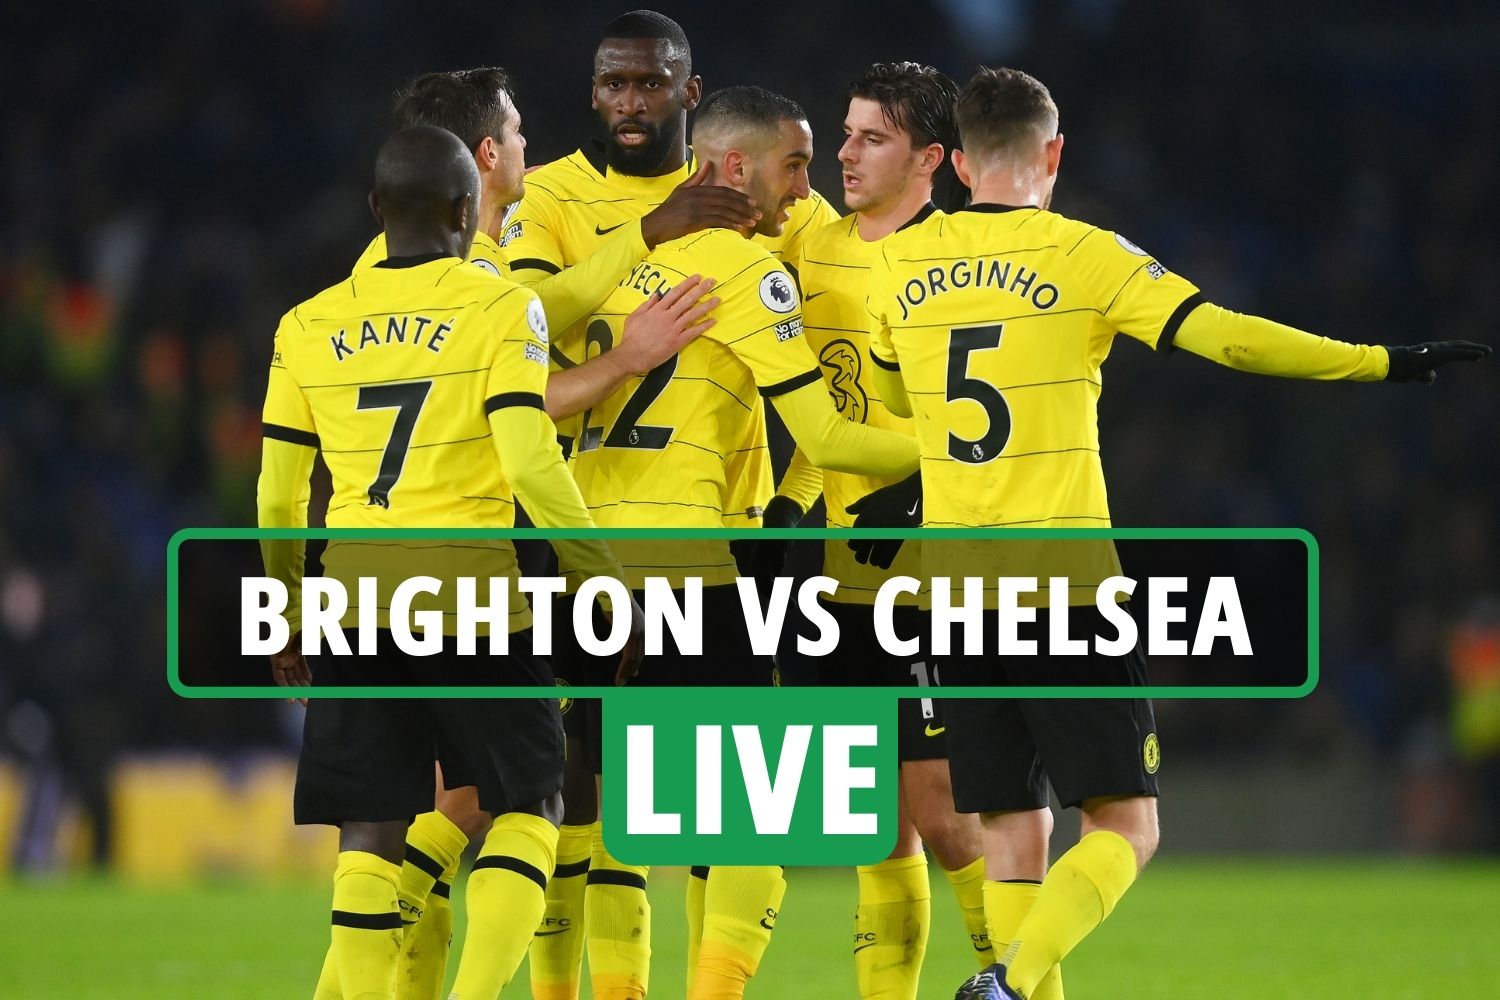 Brighton vs Chelsea LIVE: Stream, score, TV channel as Ziyech lashes visitors in front with long-ranger at... - The Sun